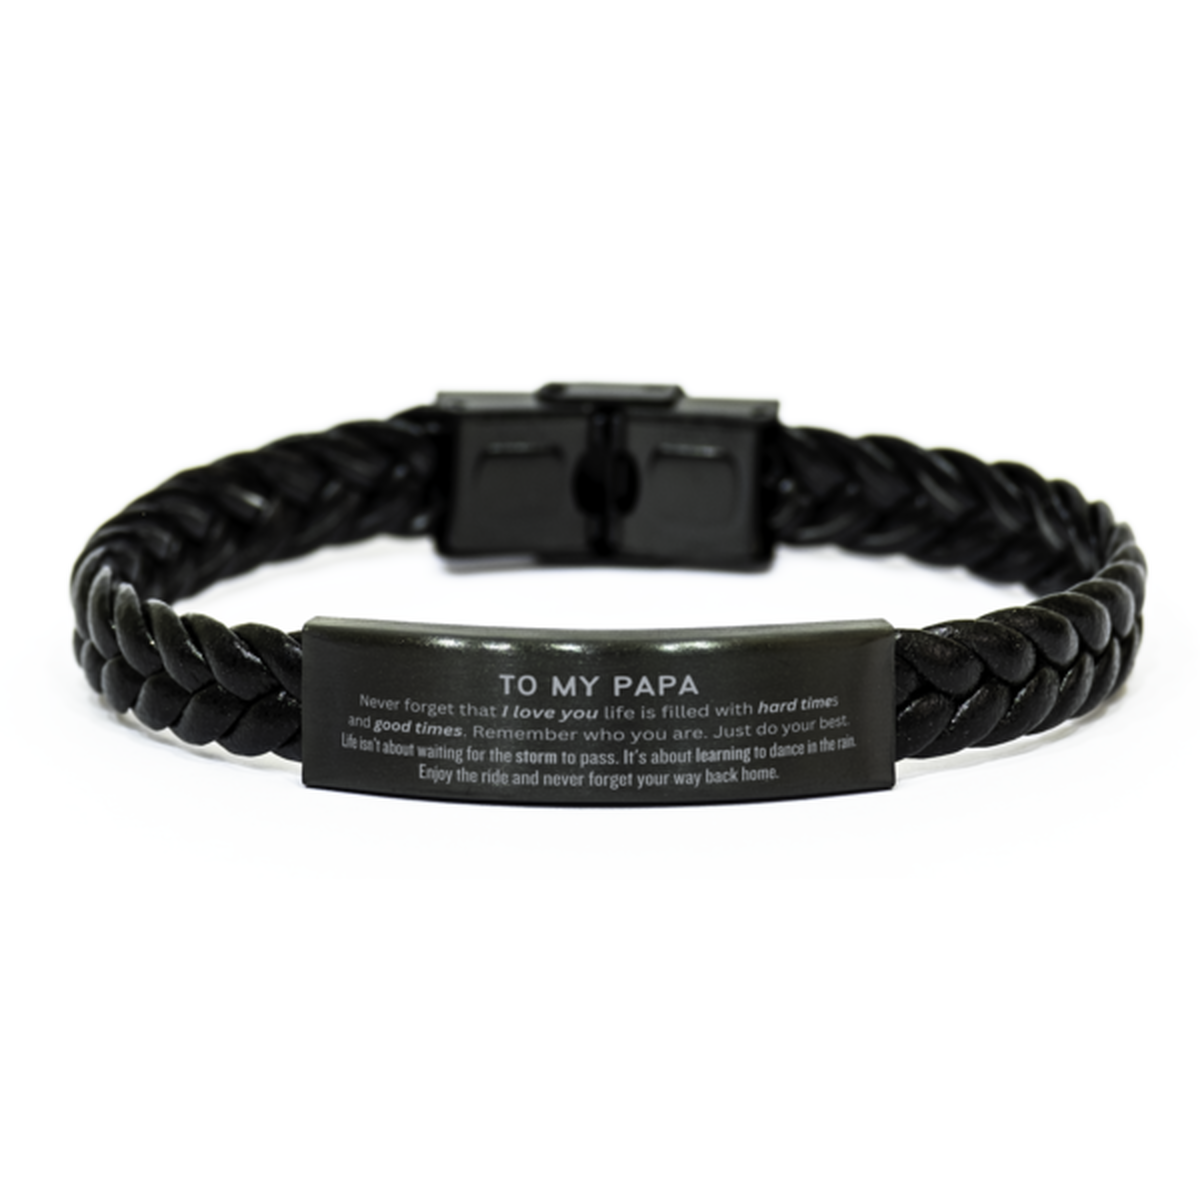 Christmas Papa Braided Leather Bracelet Gifts, To My Papa Birthday Thank You Gifts For Papa, Graduation Unique Gifts For Papa To My Papa Never forget that I love you life is filled with hard times and good times. Remember who you are. Just do your best